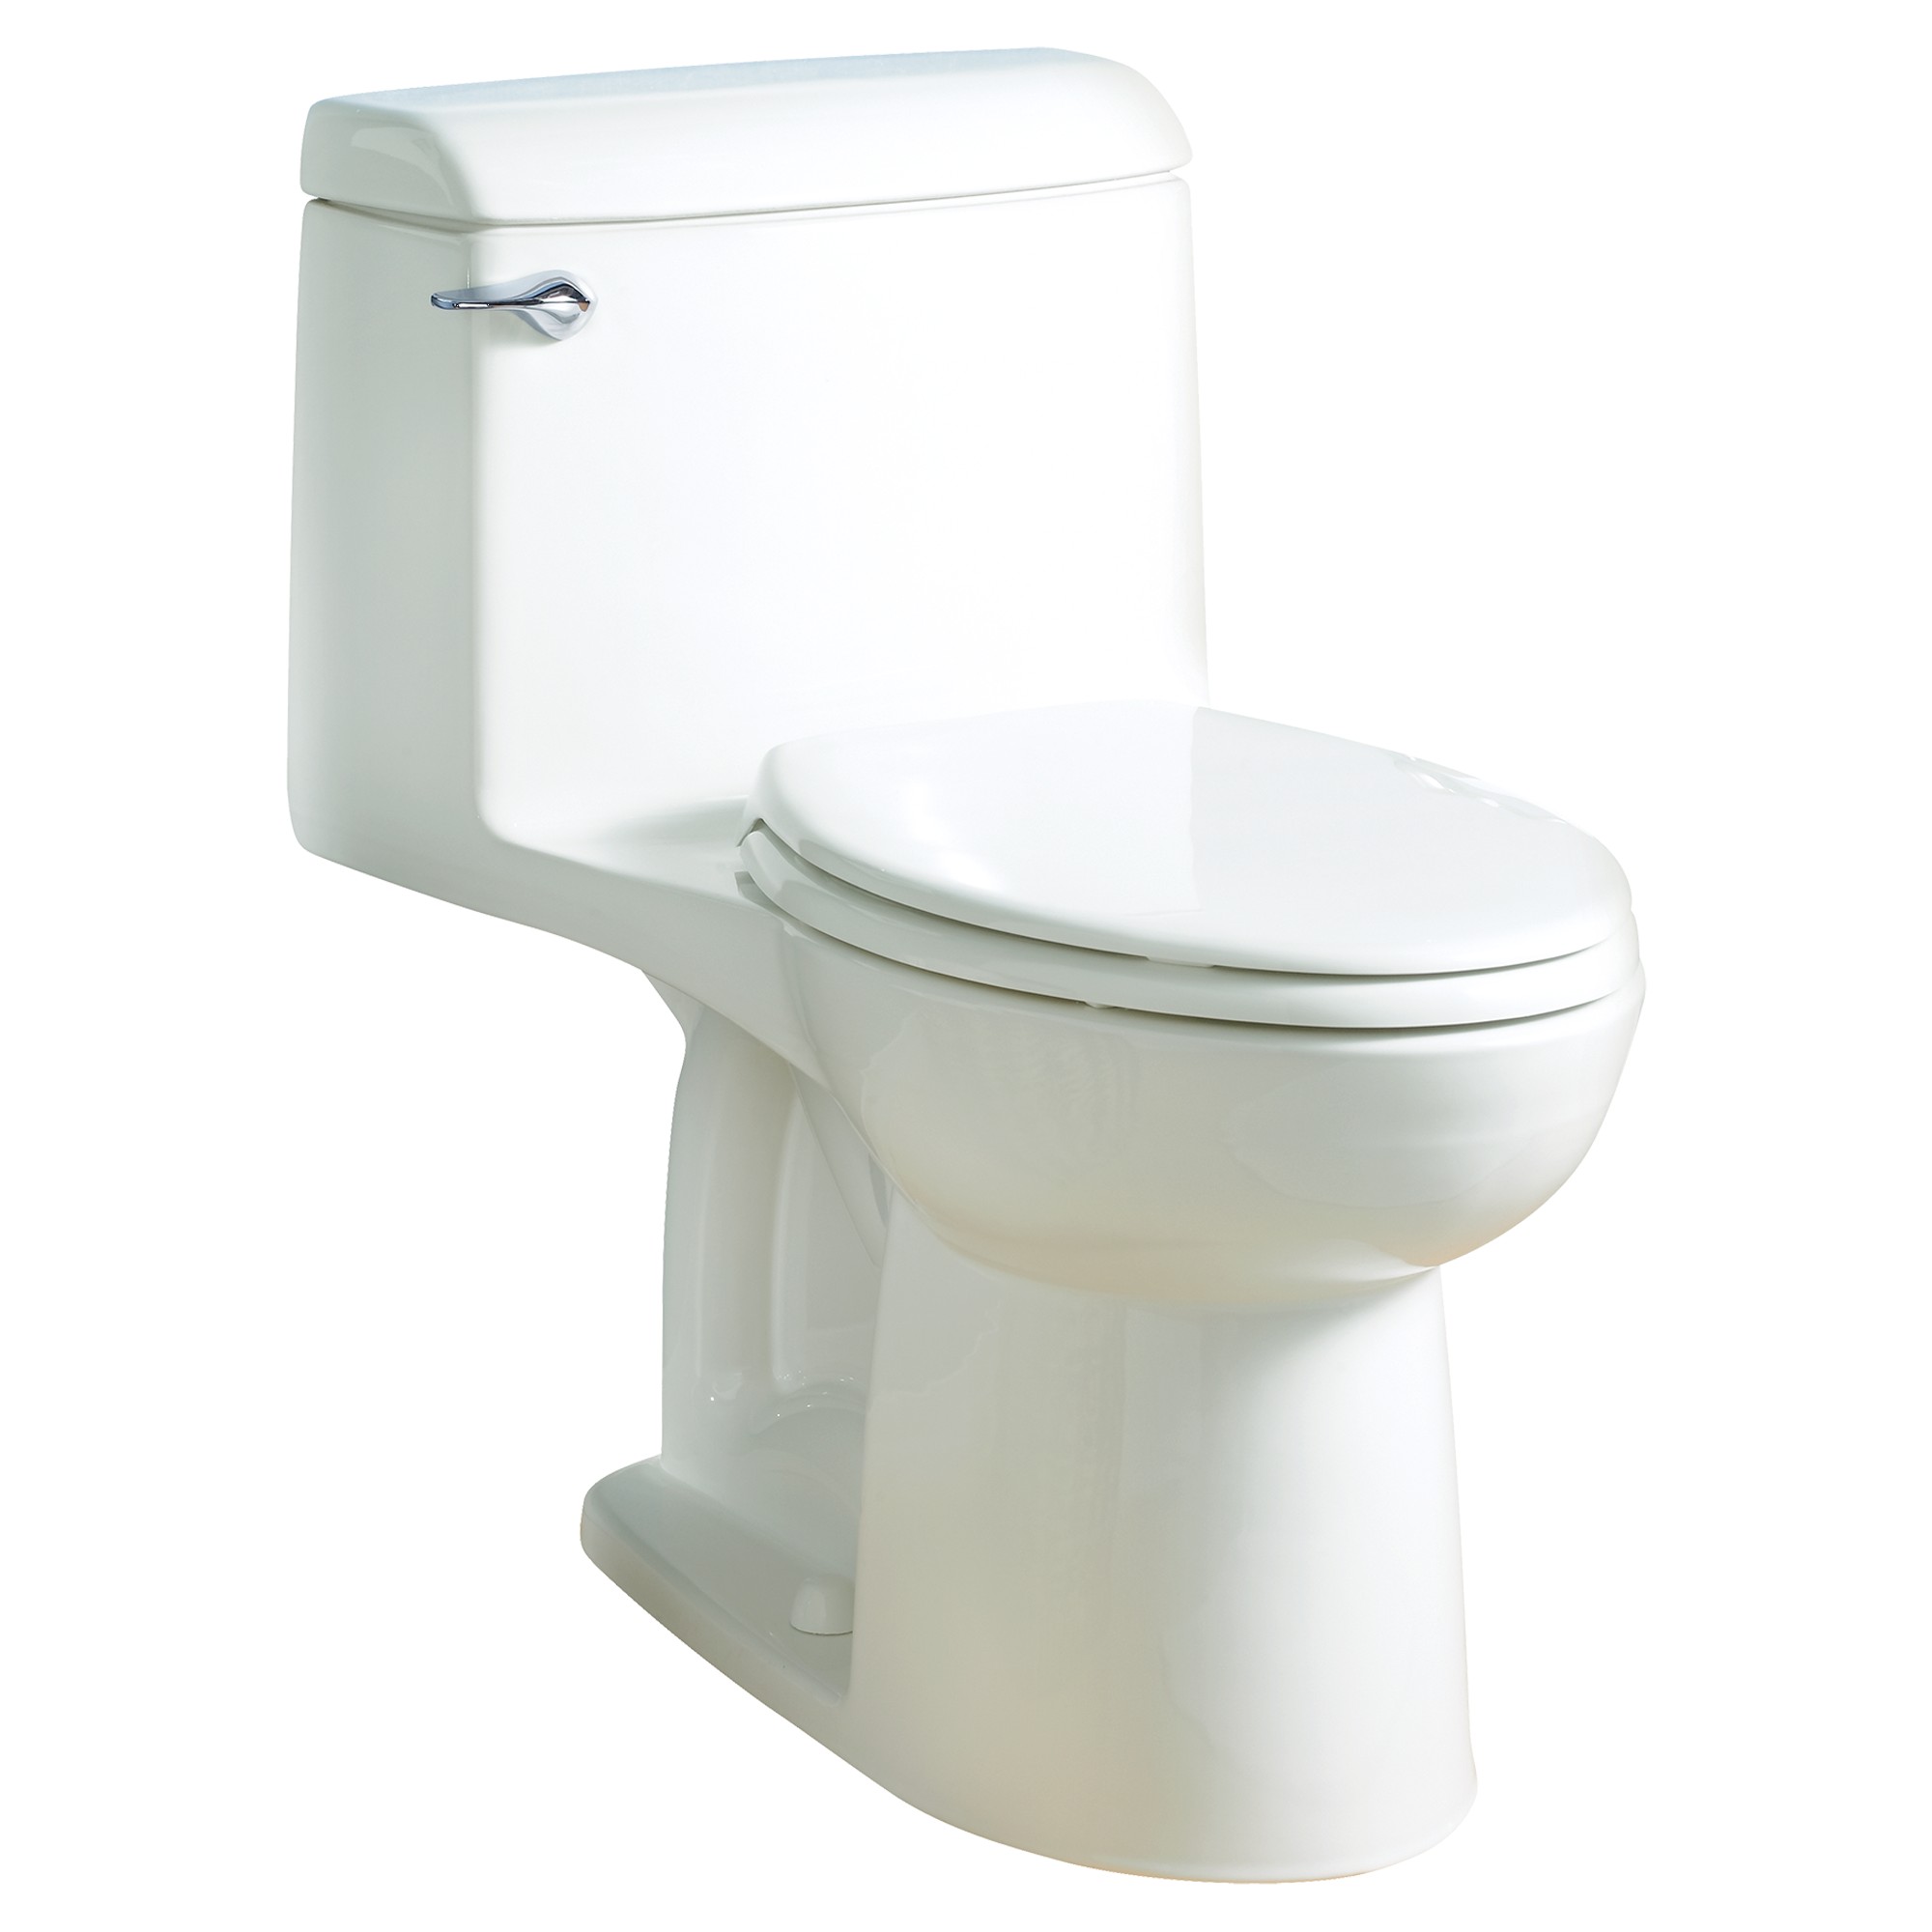 American Standard | 2004.314.020 | AMERICAN STANDARD 2004.314 CHAMPION 4 ELONGATED 1-PIECE TOILET WHT 020 WHITE 1.6GPF WITH SEAT